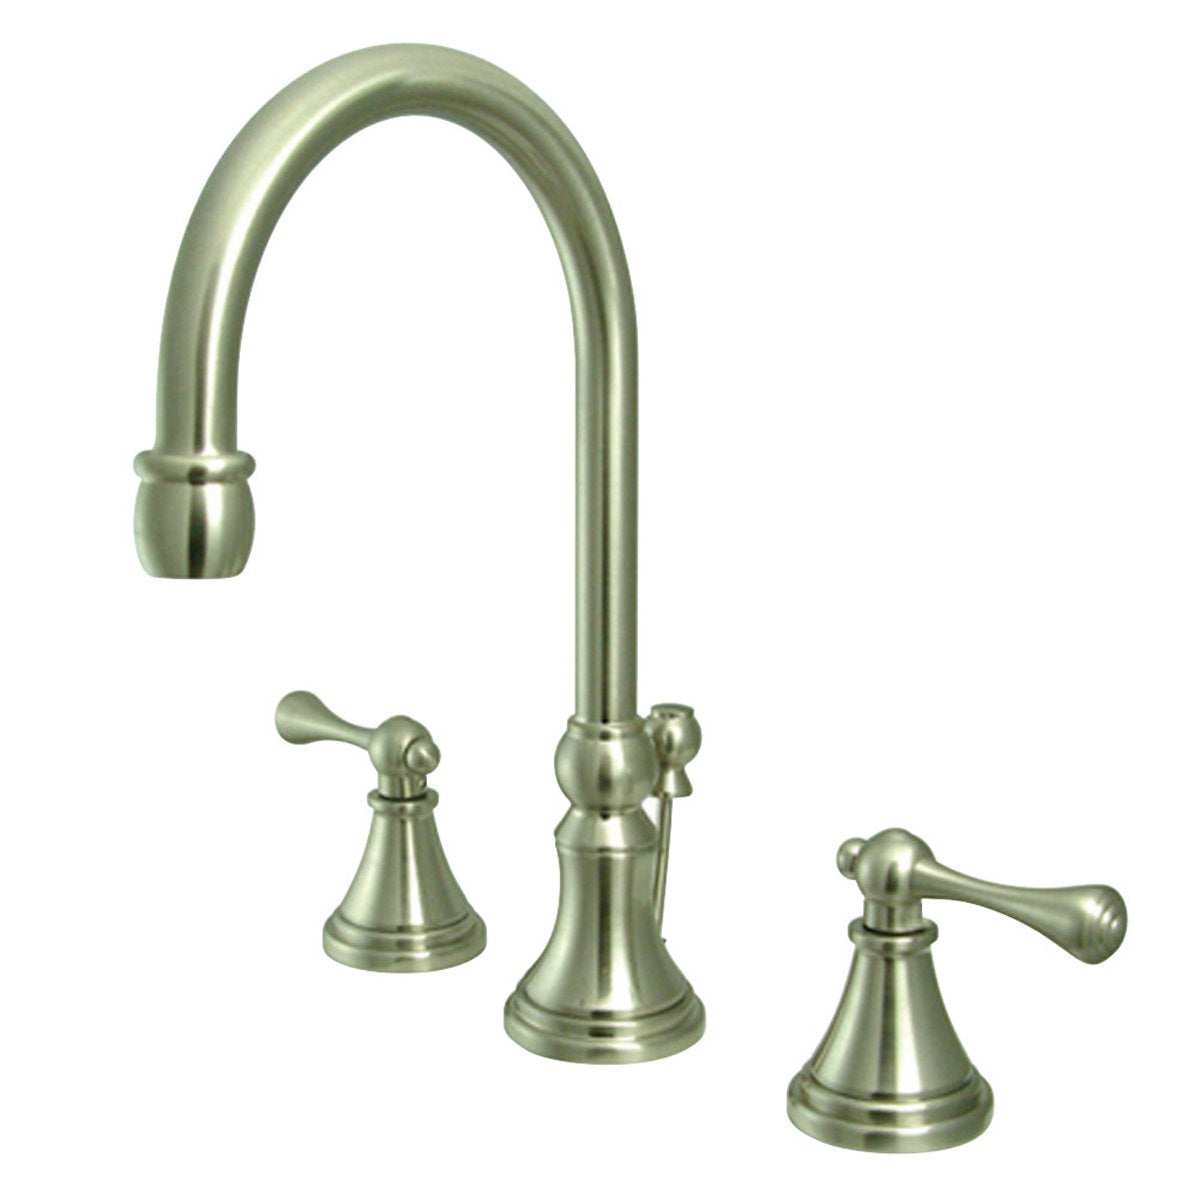 Kingston Brass Governor 8" Widespread 3-Hole Bathroom Faucet